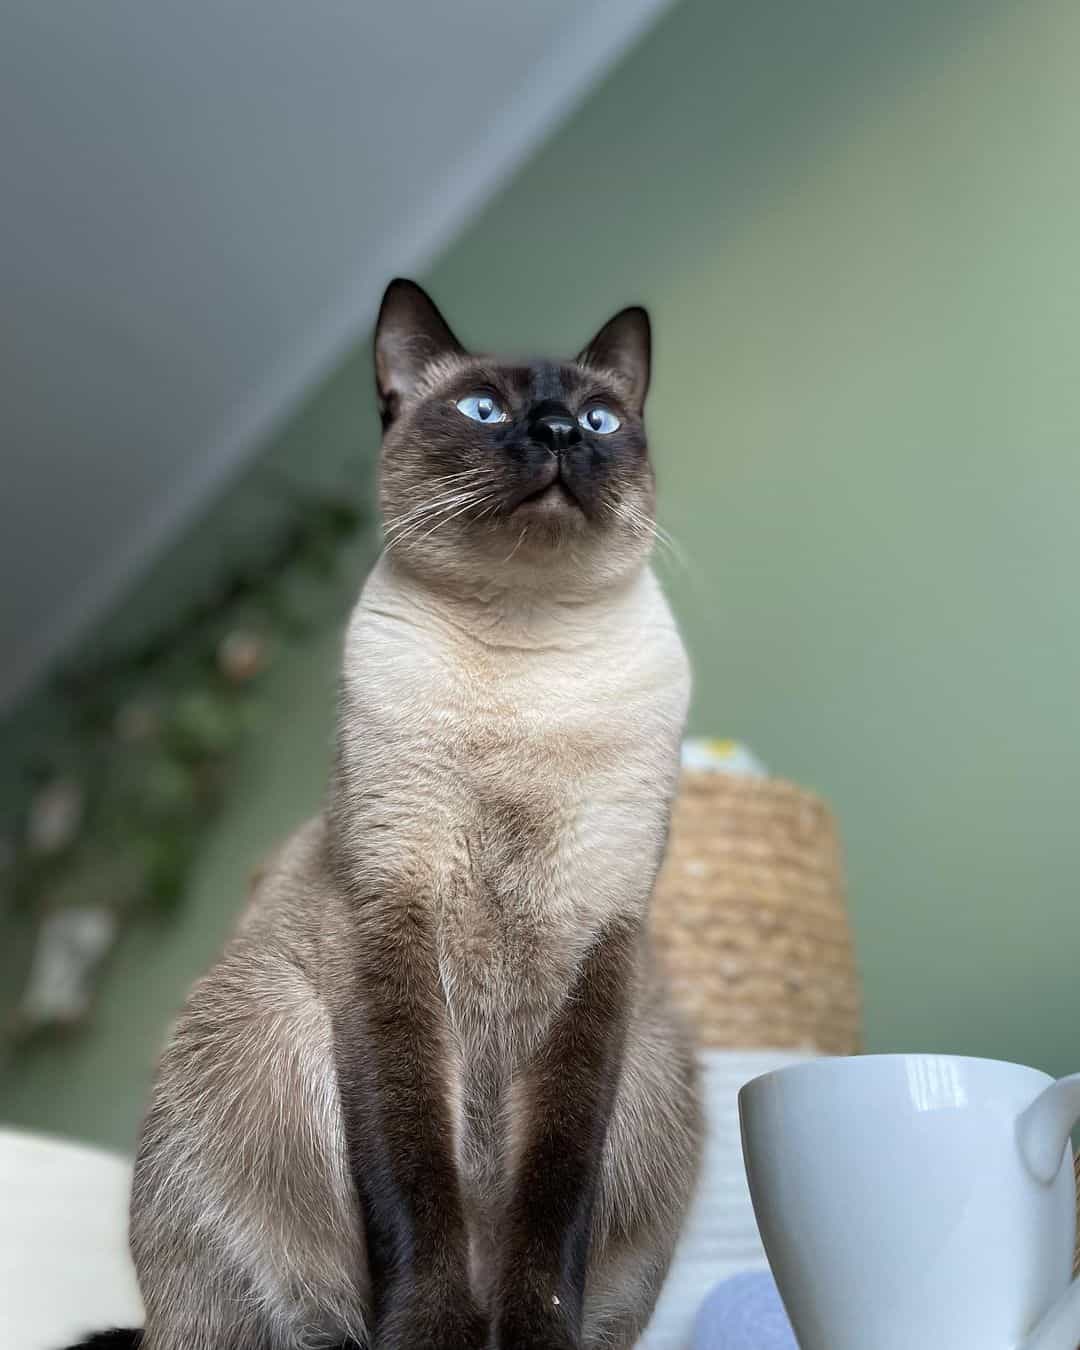 photo of a gorgeous siamese cat, one of the friendliest cat breeds